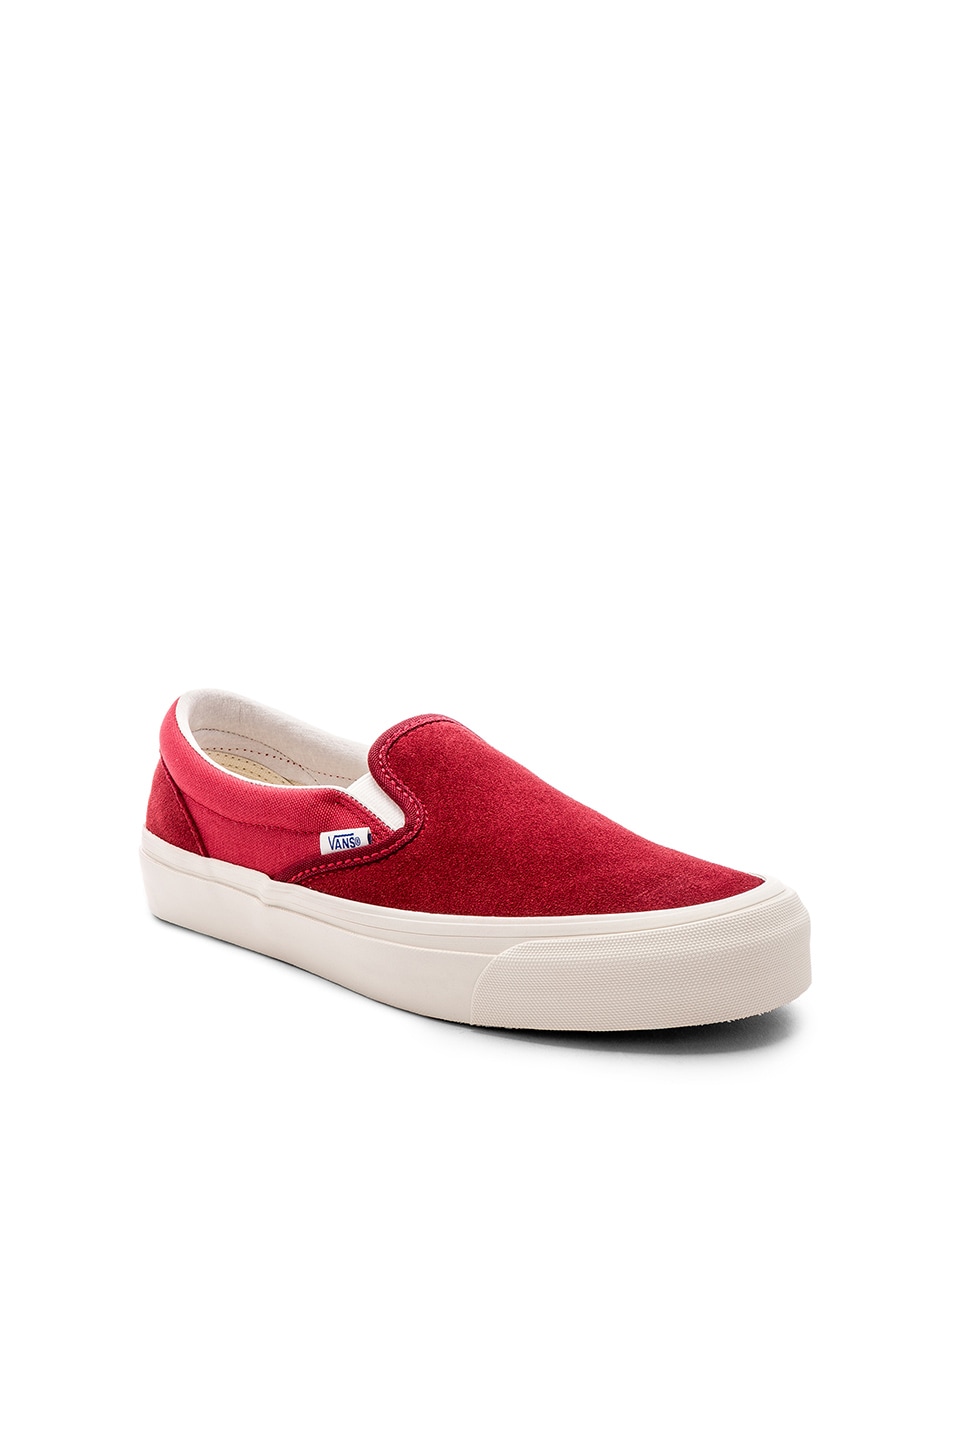 Image 1 of Vans Vault OG Classic Slip On LX in Sun Dried Tomato & Mineral Red